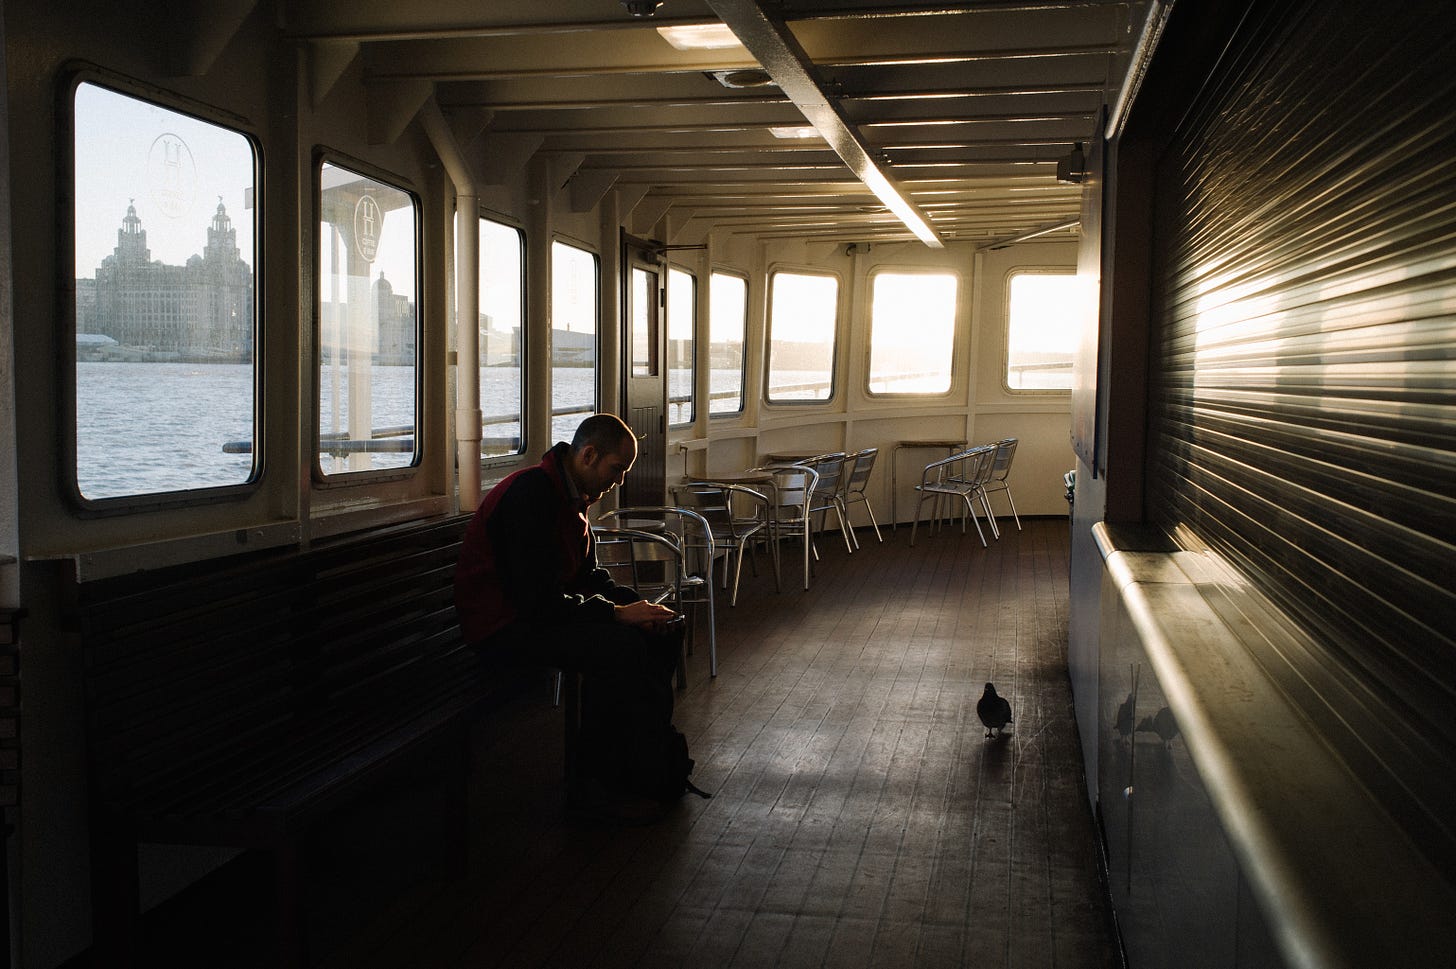 A man sits on the upstairs deck of the ferry while a pigeon walks past.